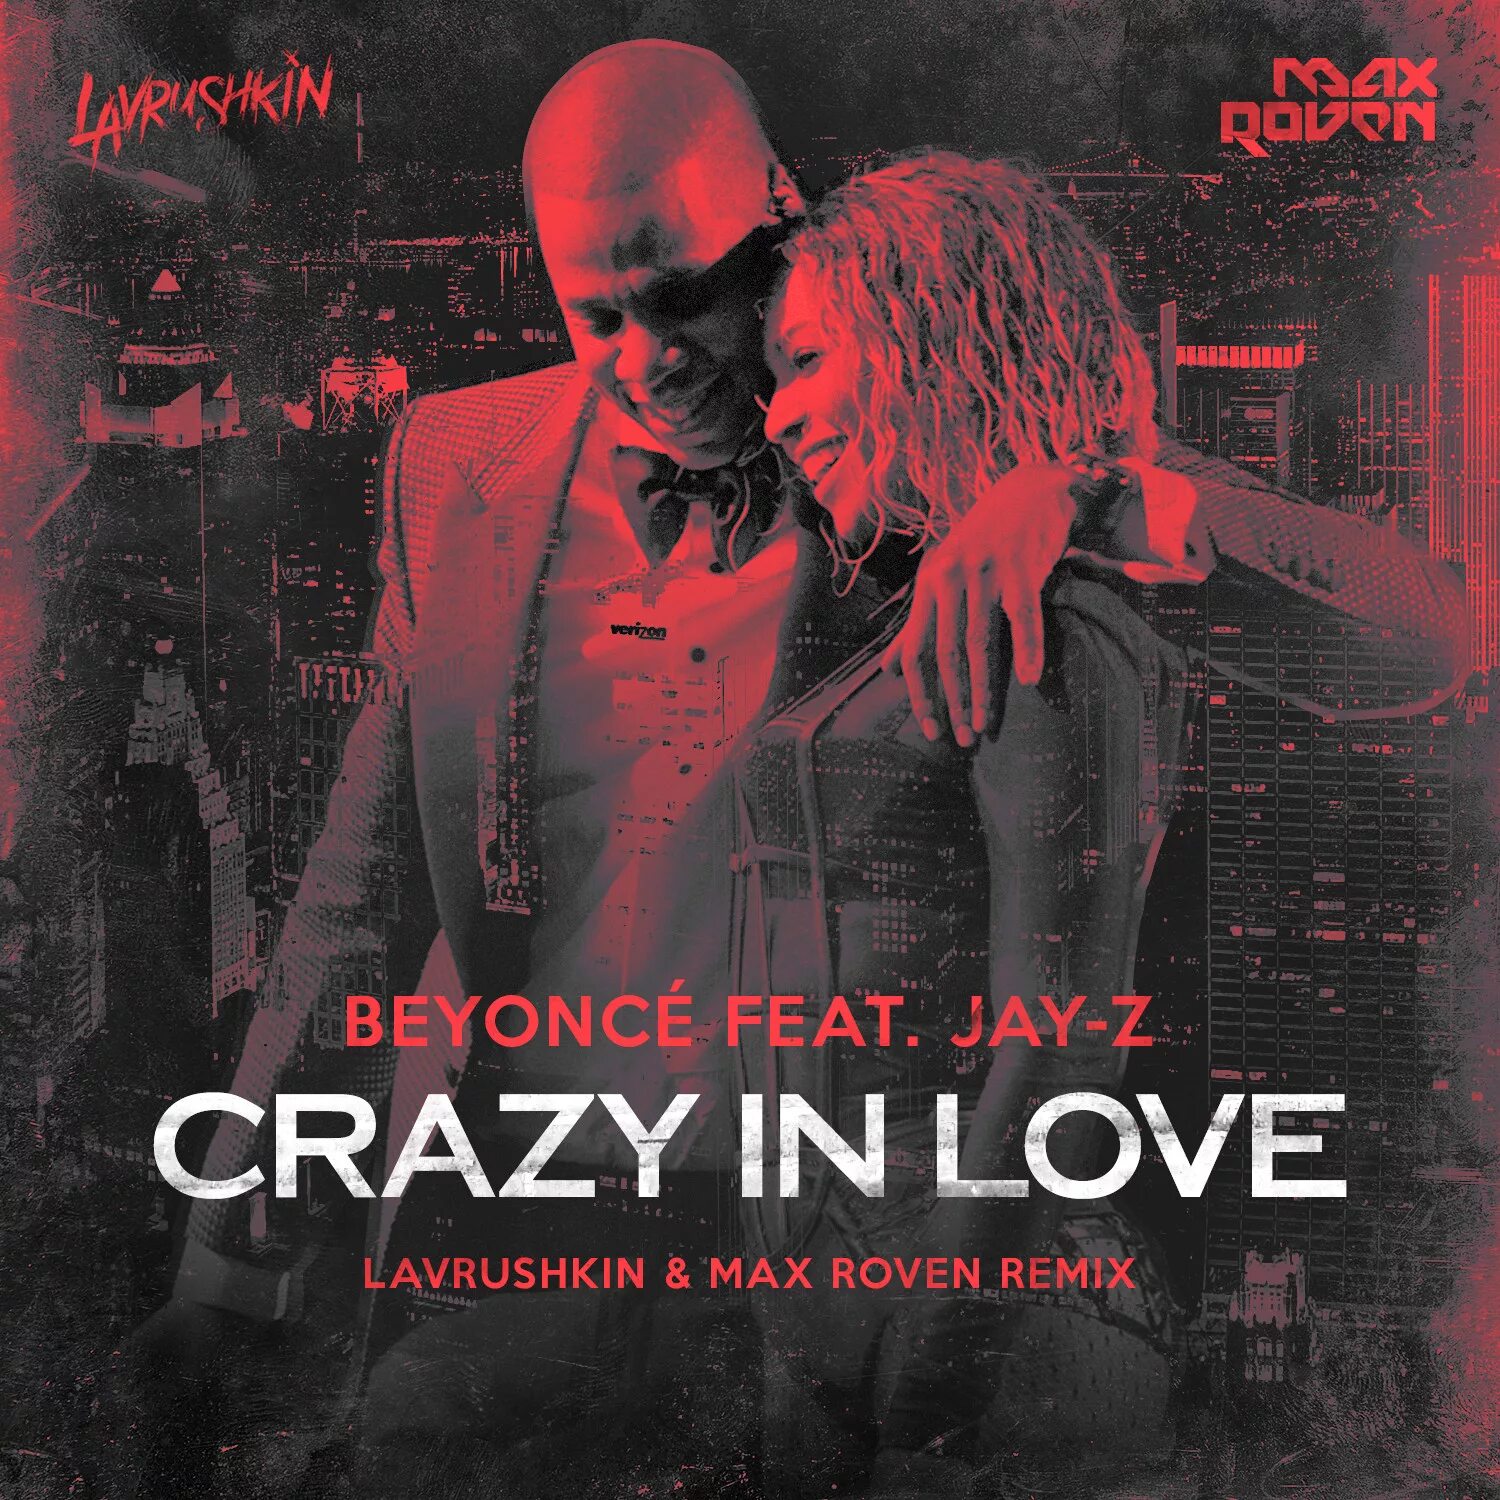 Featuring love. Crazy in Love. Beyonce, Jay-z - Crazy in Love обложка. Beyonce Jay z Crazy in Love. Crazy in Love обложка.